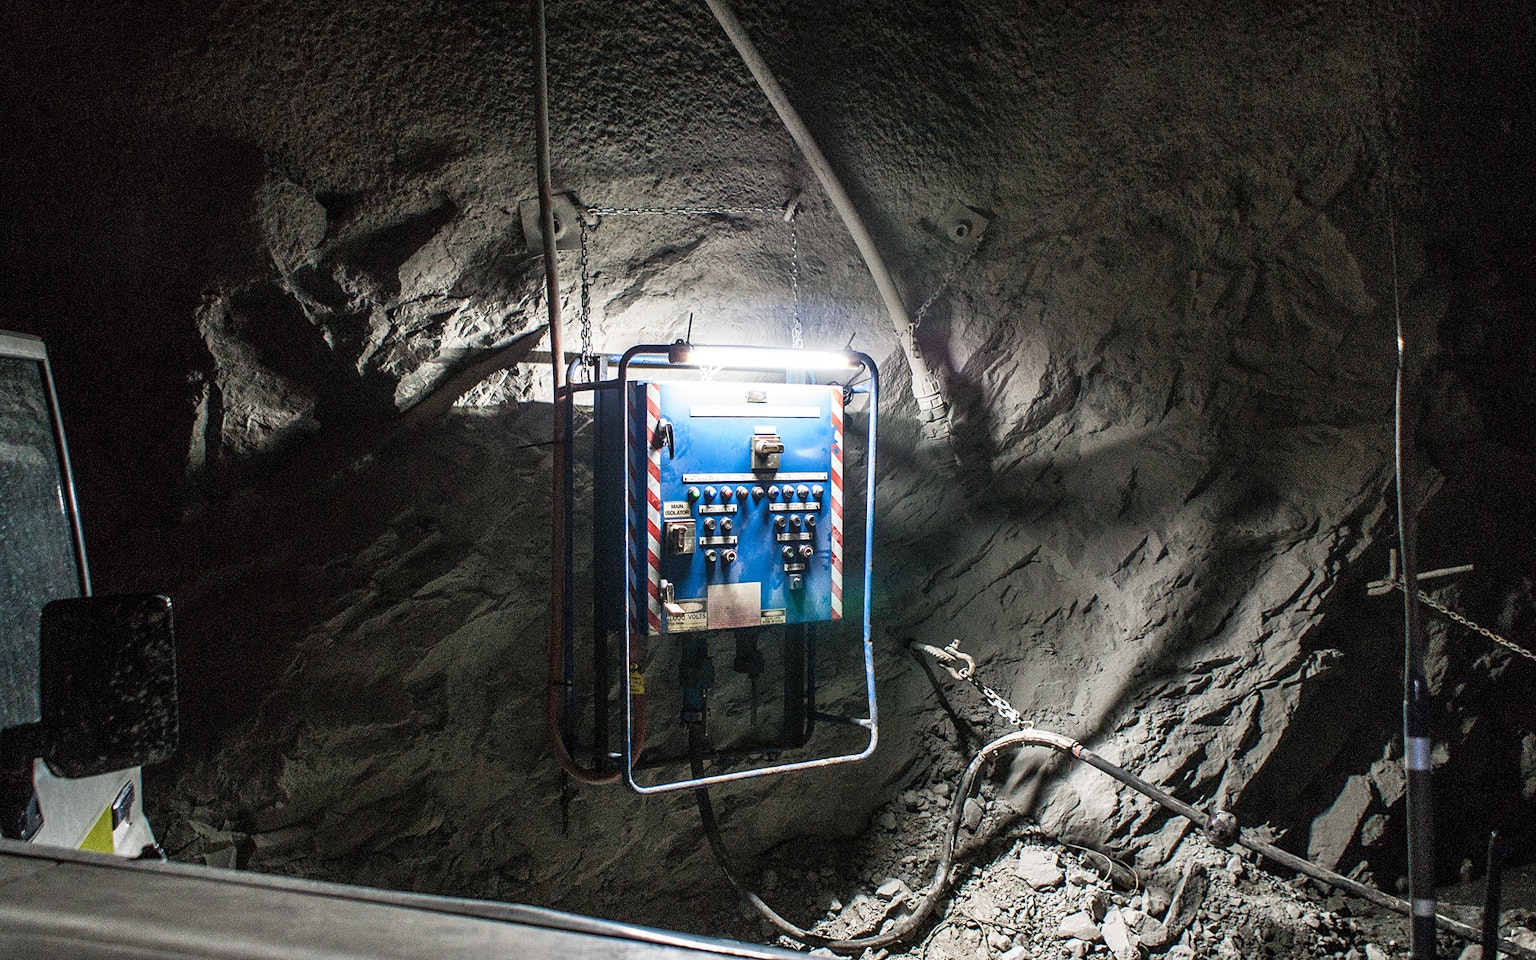 AC2 Mining Lead Light in application, installed in an underground mine over a switch board